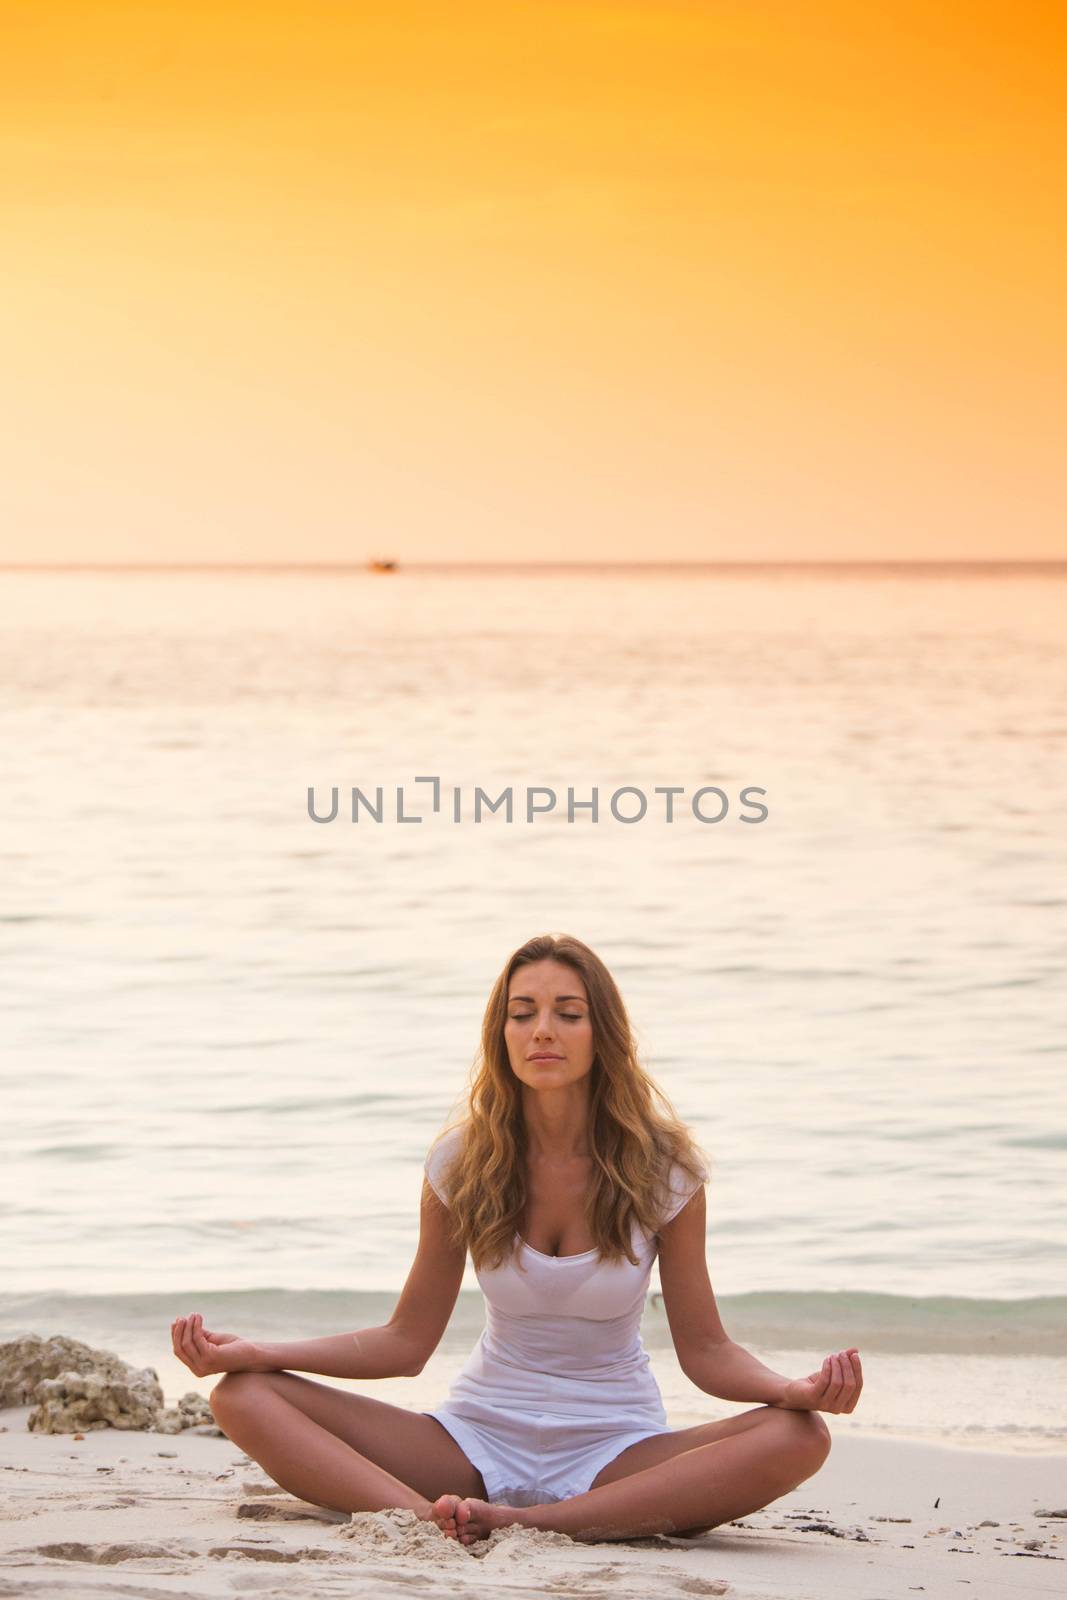 Young woman practicing yoga on the beach at sunset